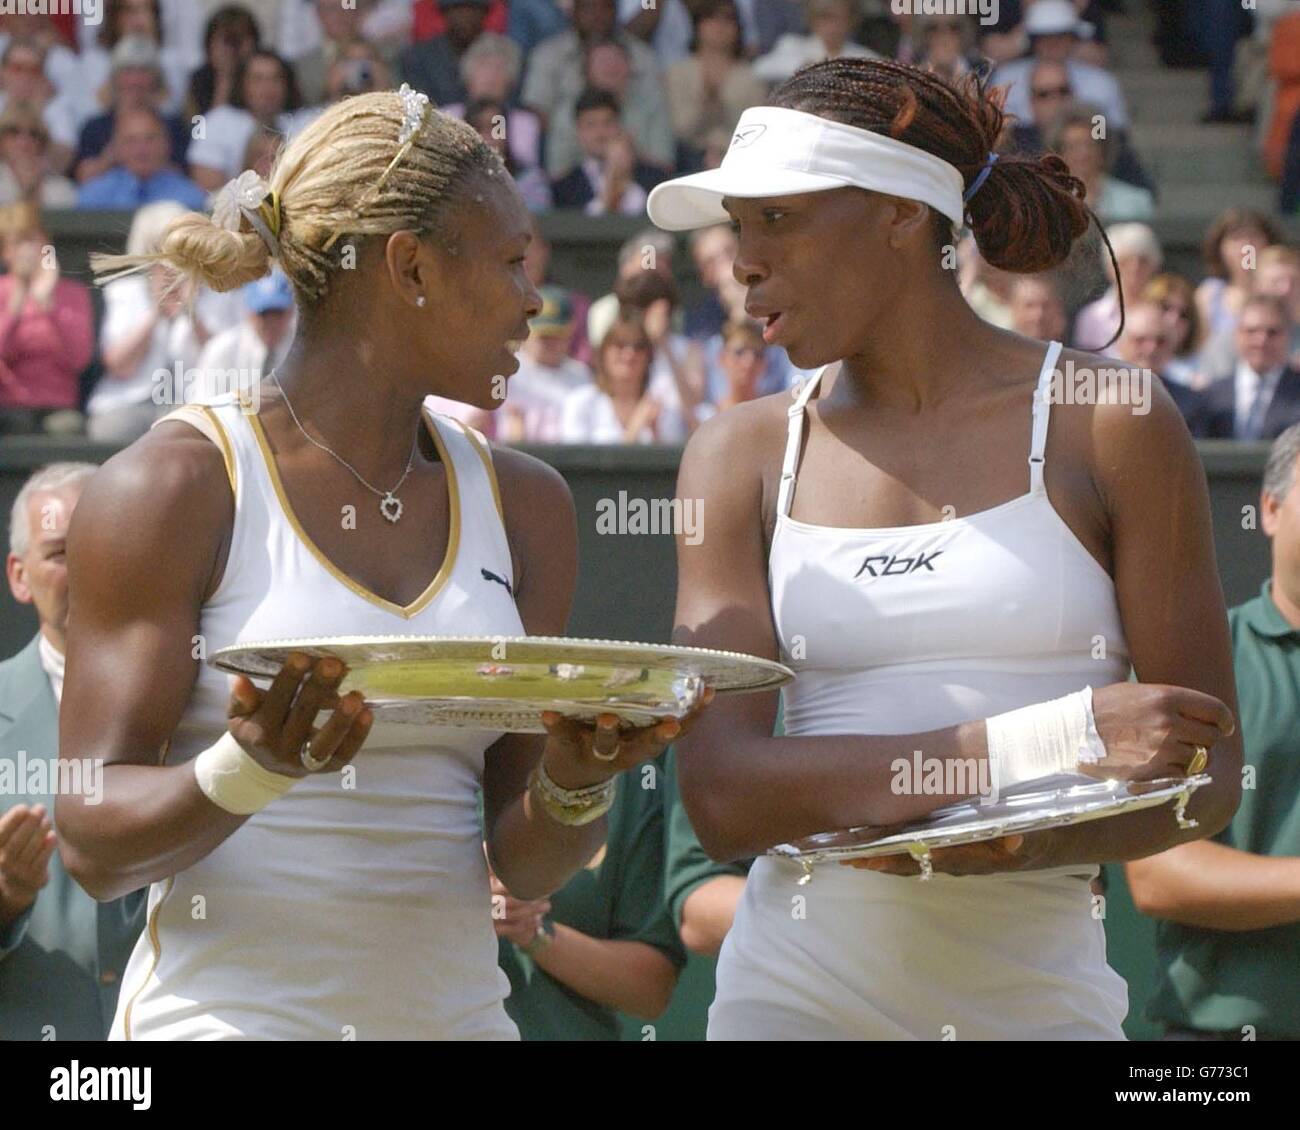 , NO COMMERCIAL USE. Serena Williams (left) from the USA holds her trophy after beating her sister Venus (right) in the Ladies' Singles Final at Wimbledon. It is the first time in 118 years that sisters have met in the final at Wimbledon. * Serena triumphed in straight sets 7:6/6:3. Stock Photo